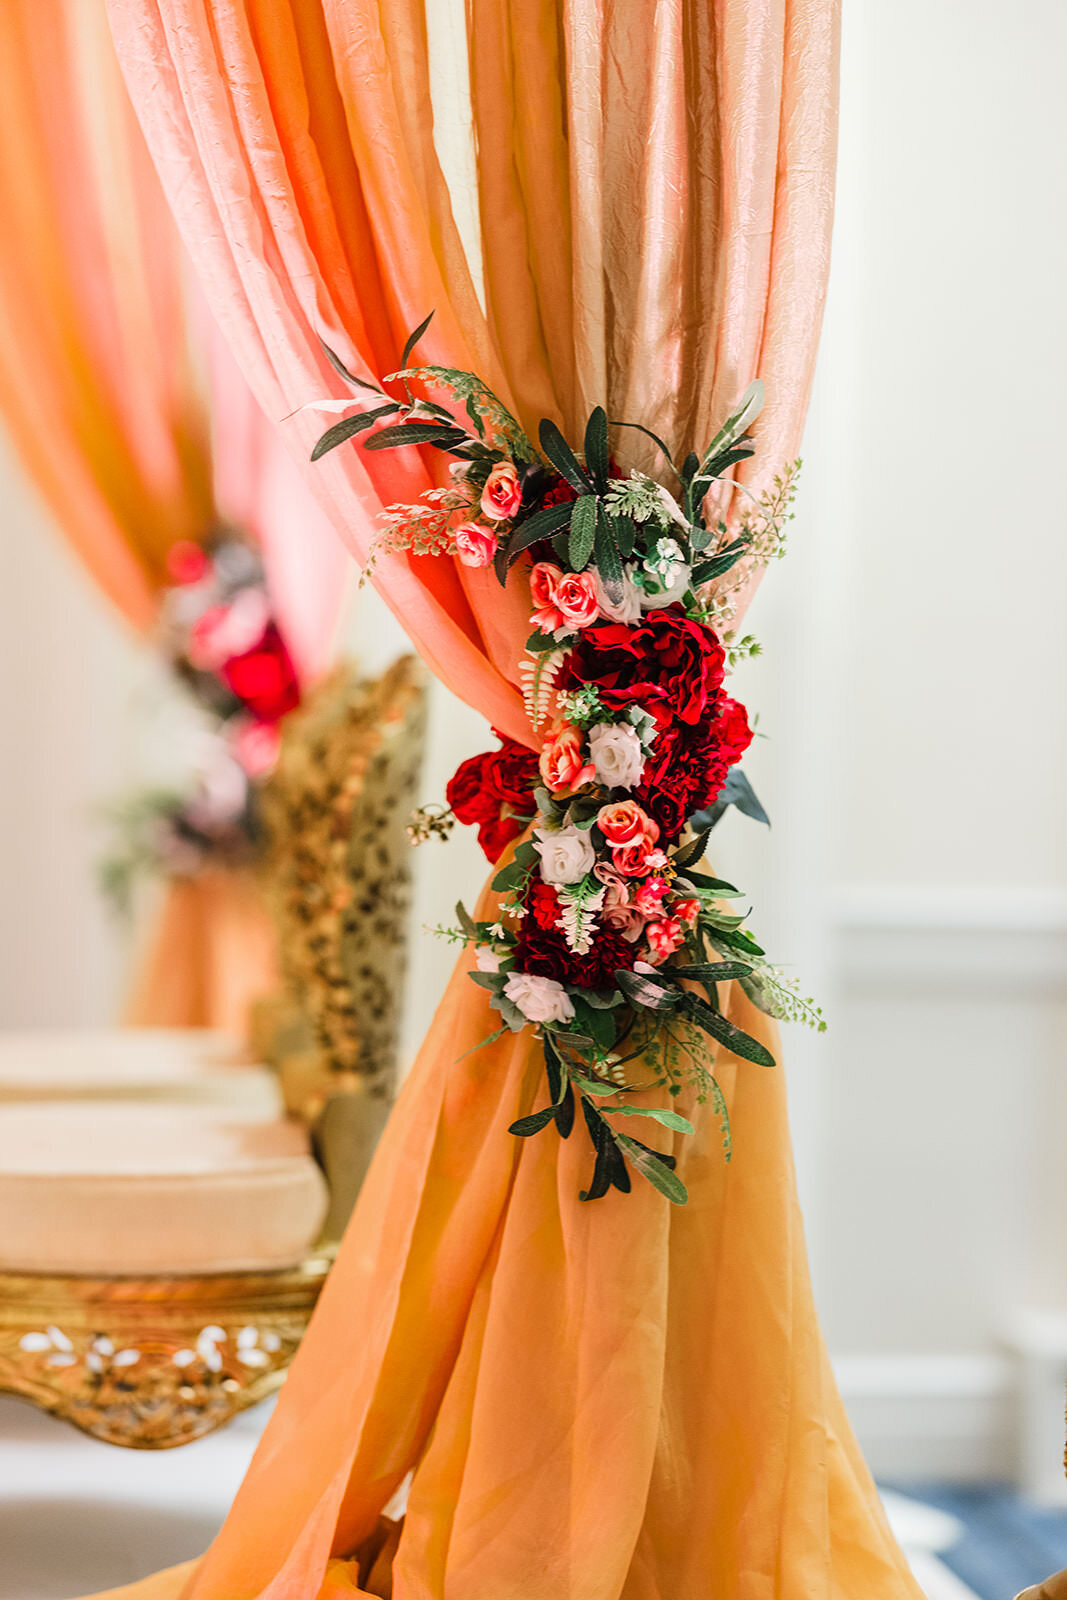 A decorative floral arrangement with red, white, and green flowers tied to a peach-colored fabric.